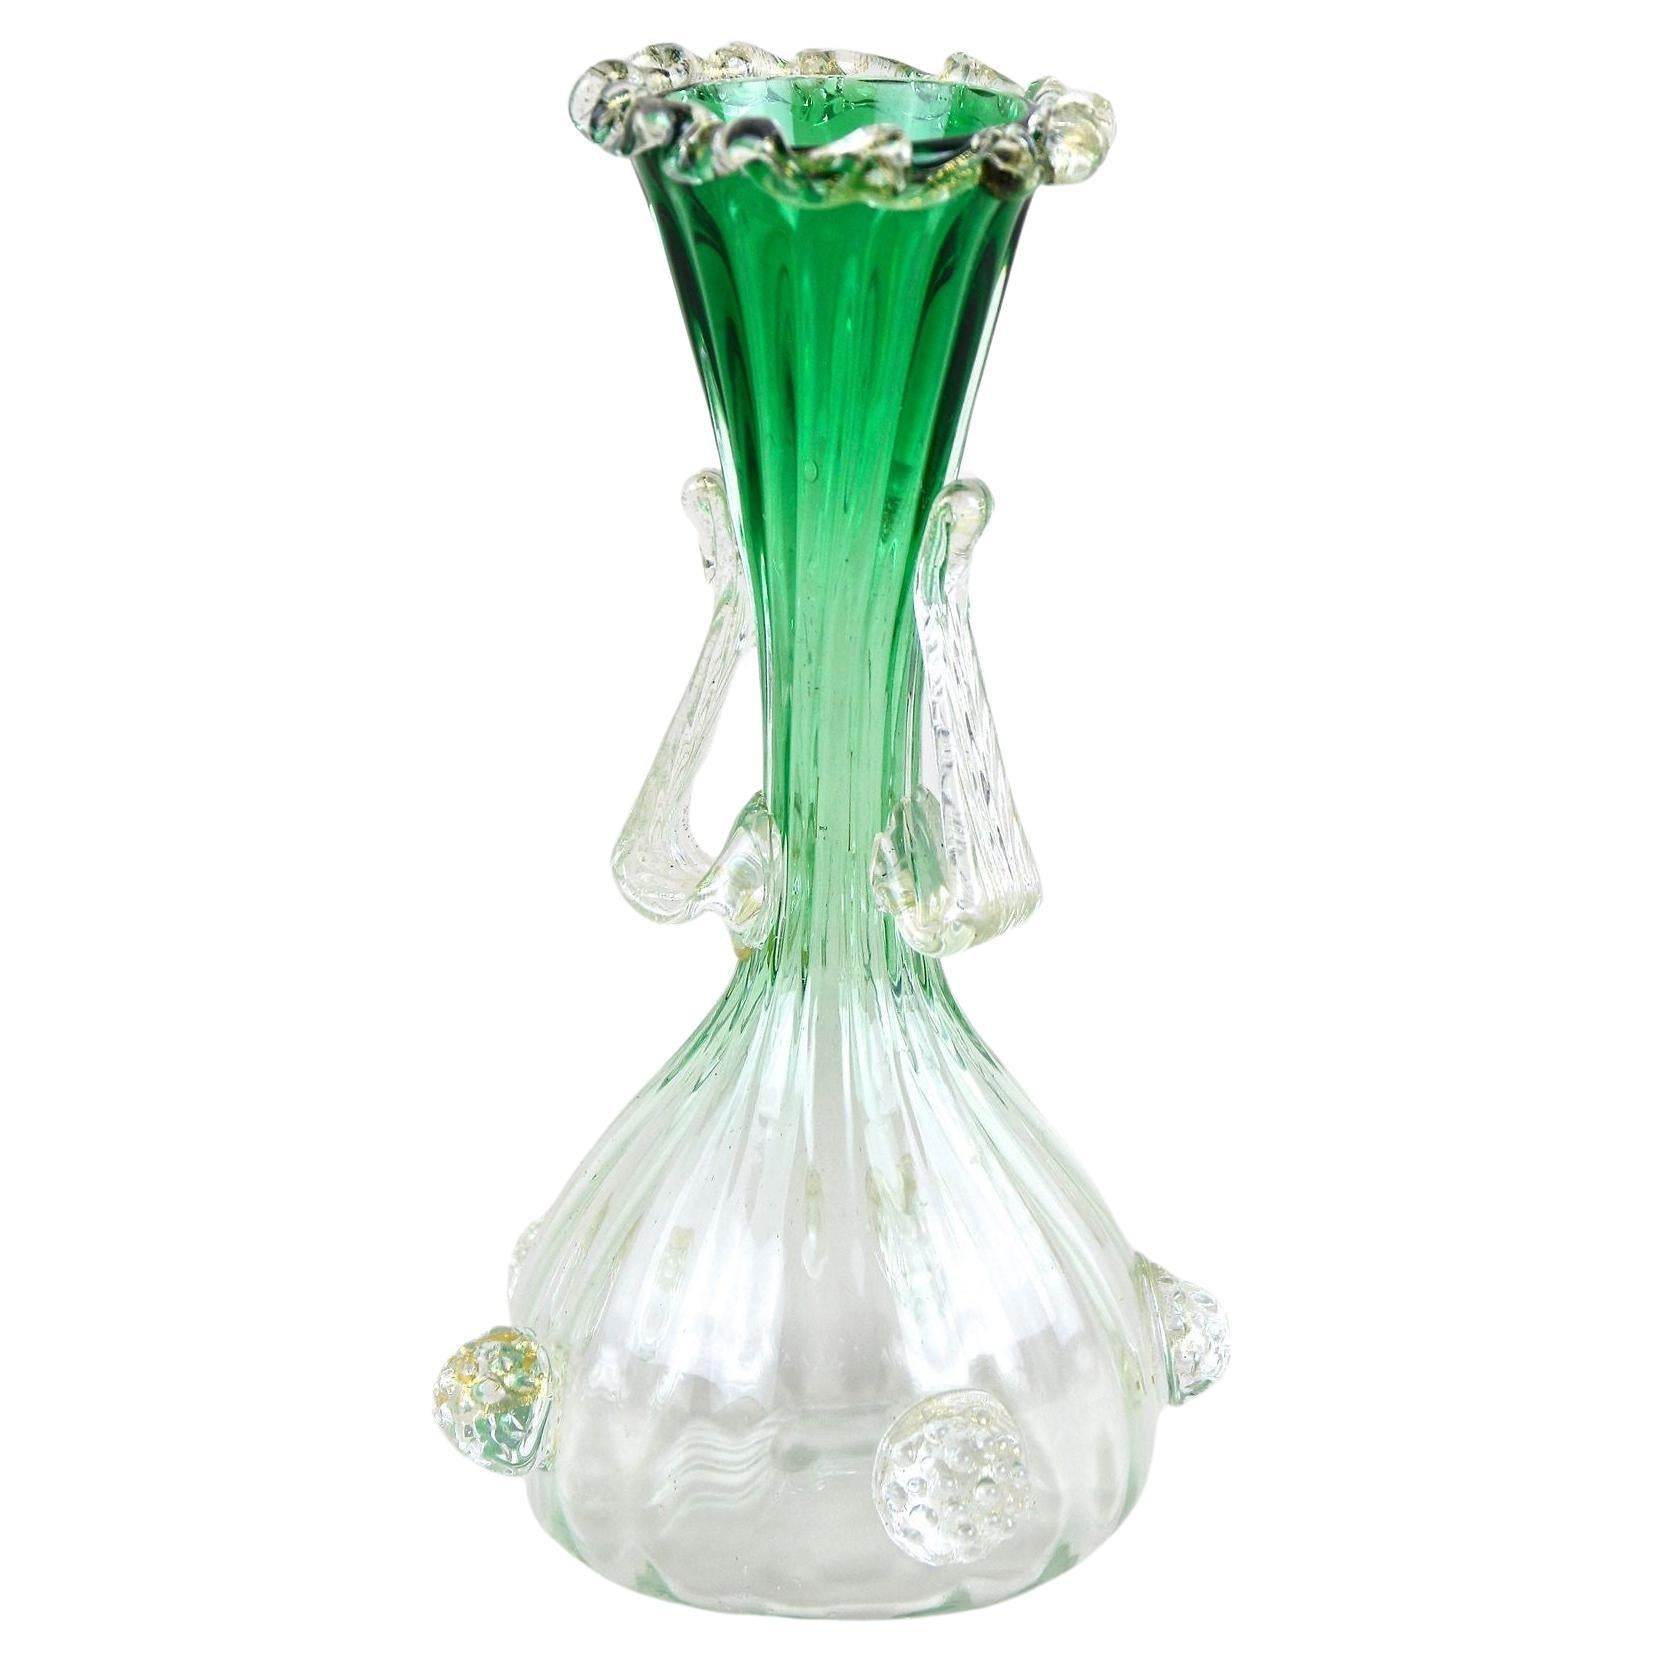 Green/ White Murano Glass Vase With 24k Gold Flakes by Fratelli Toso, IT ca 1930 For Sale